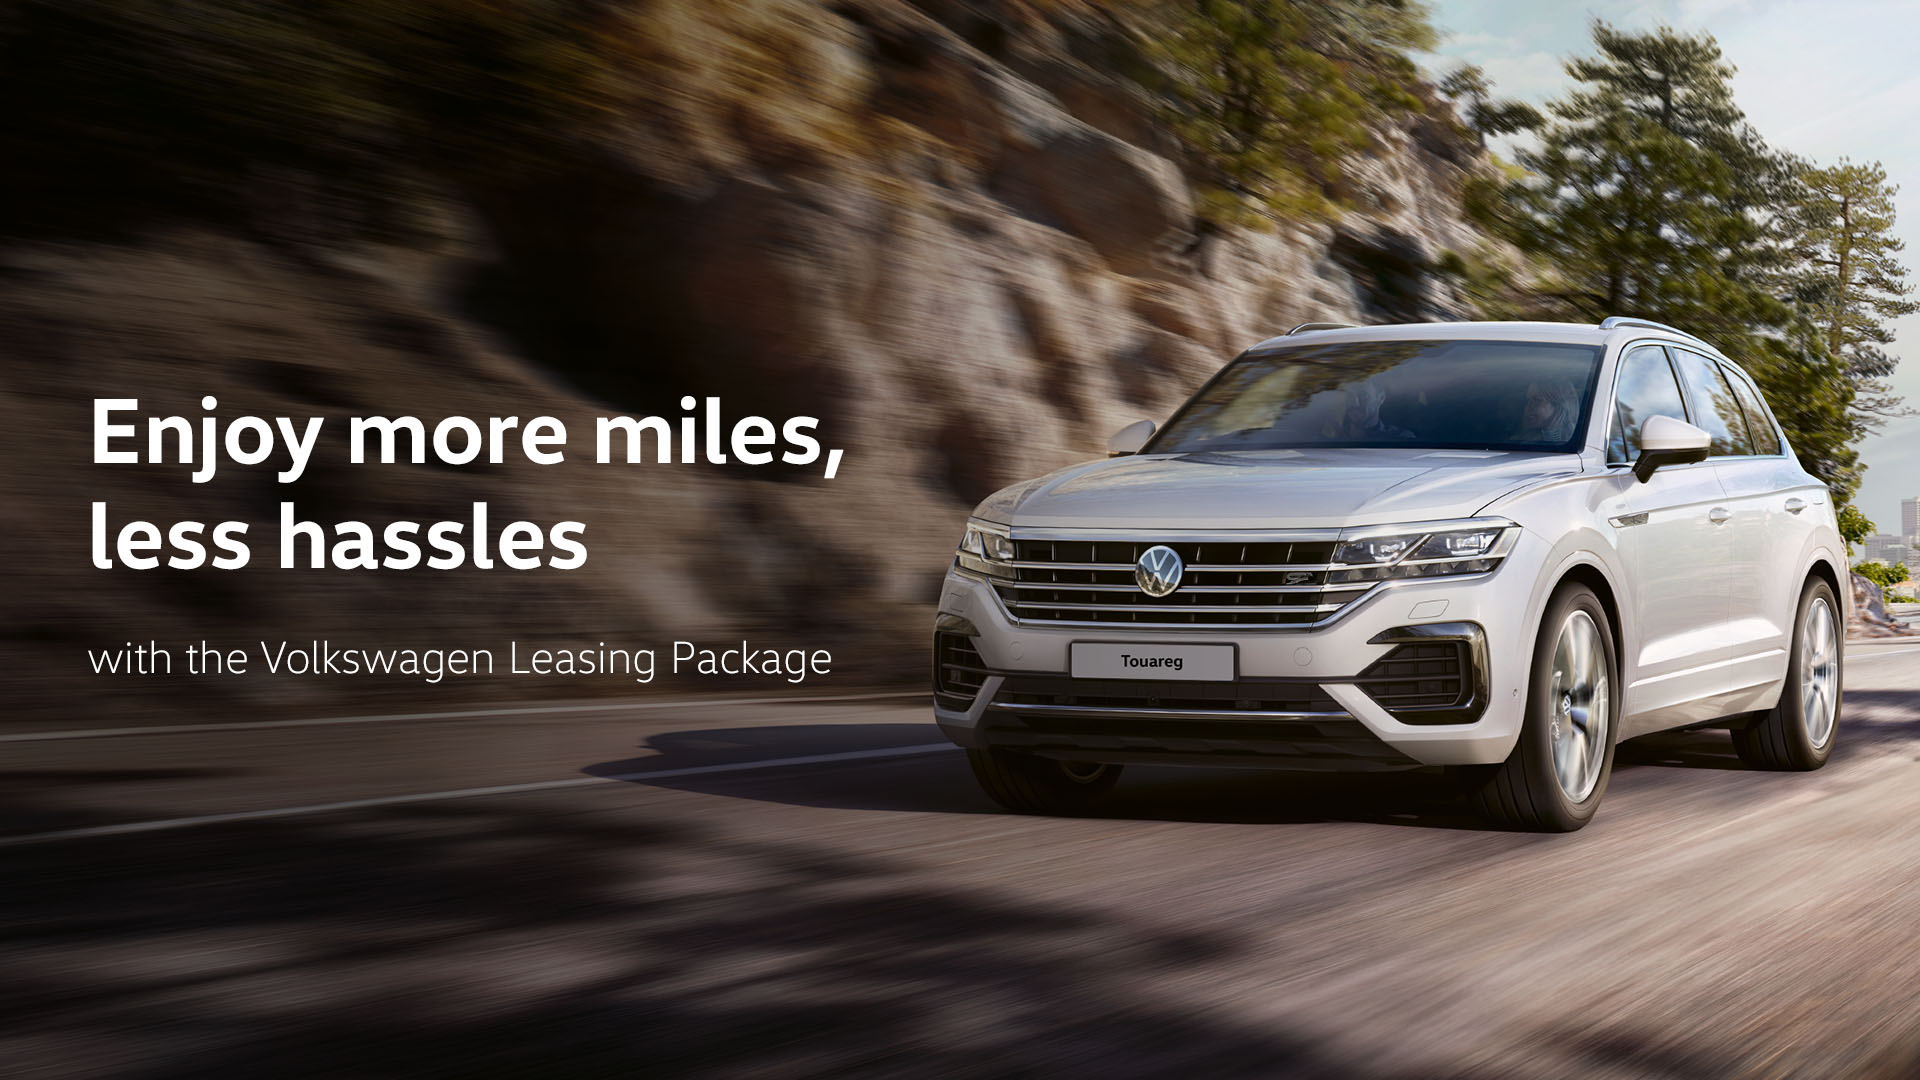 Exclusive Offers And More With Volkswagen Singapore This September